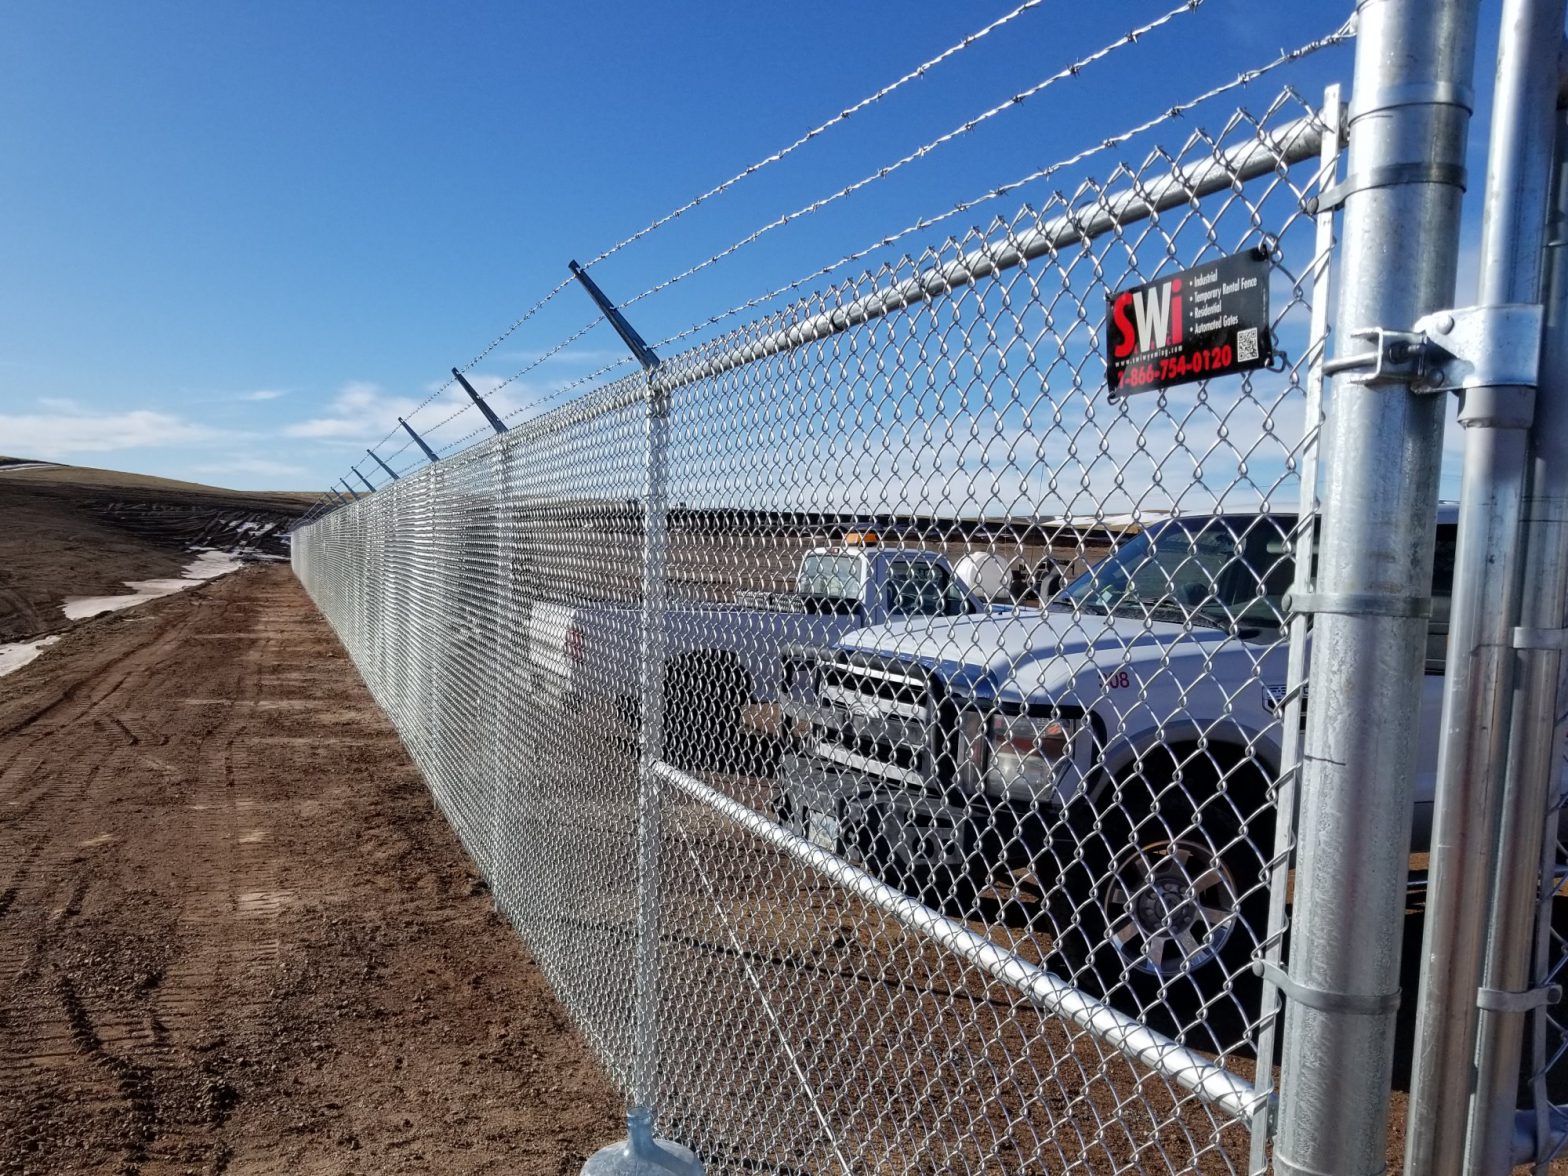 Photo of a commercial chain link fence